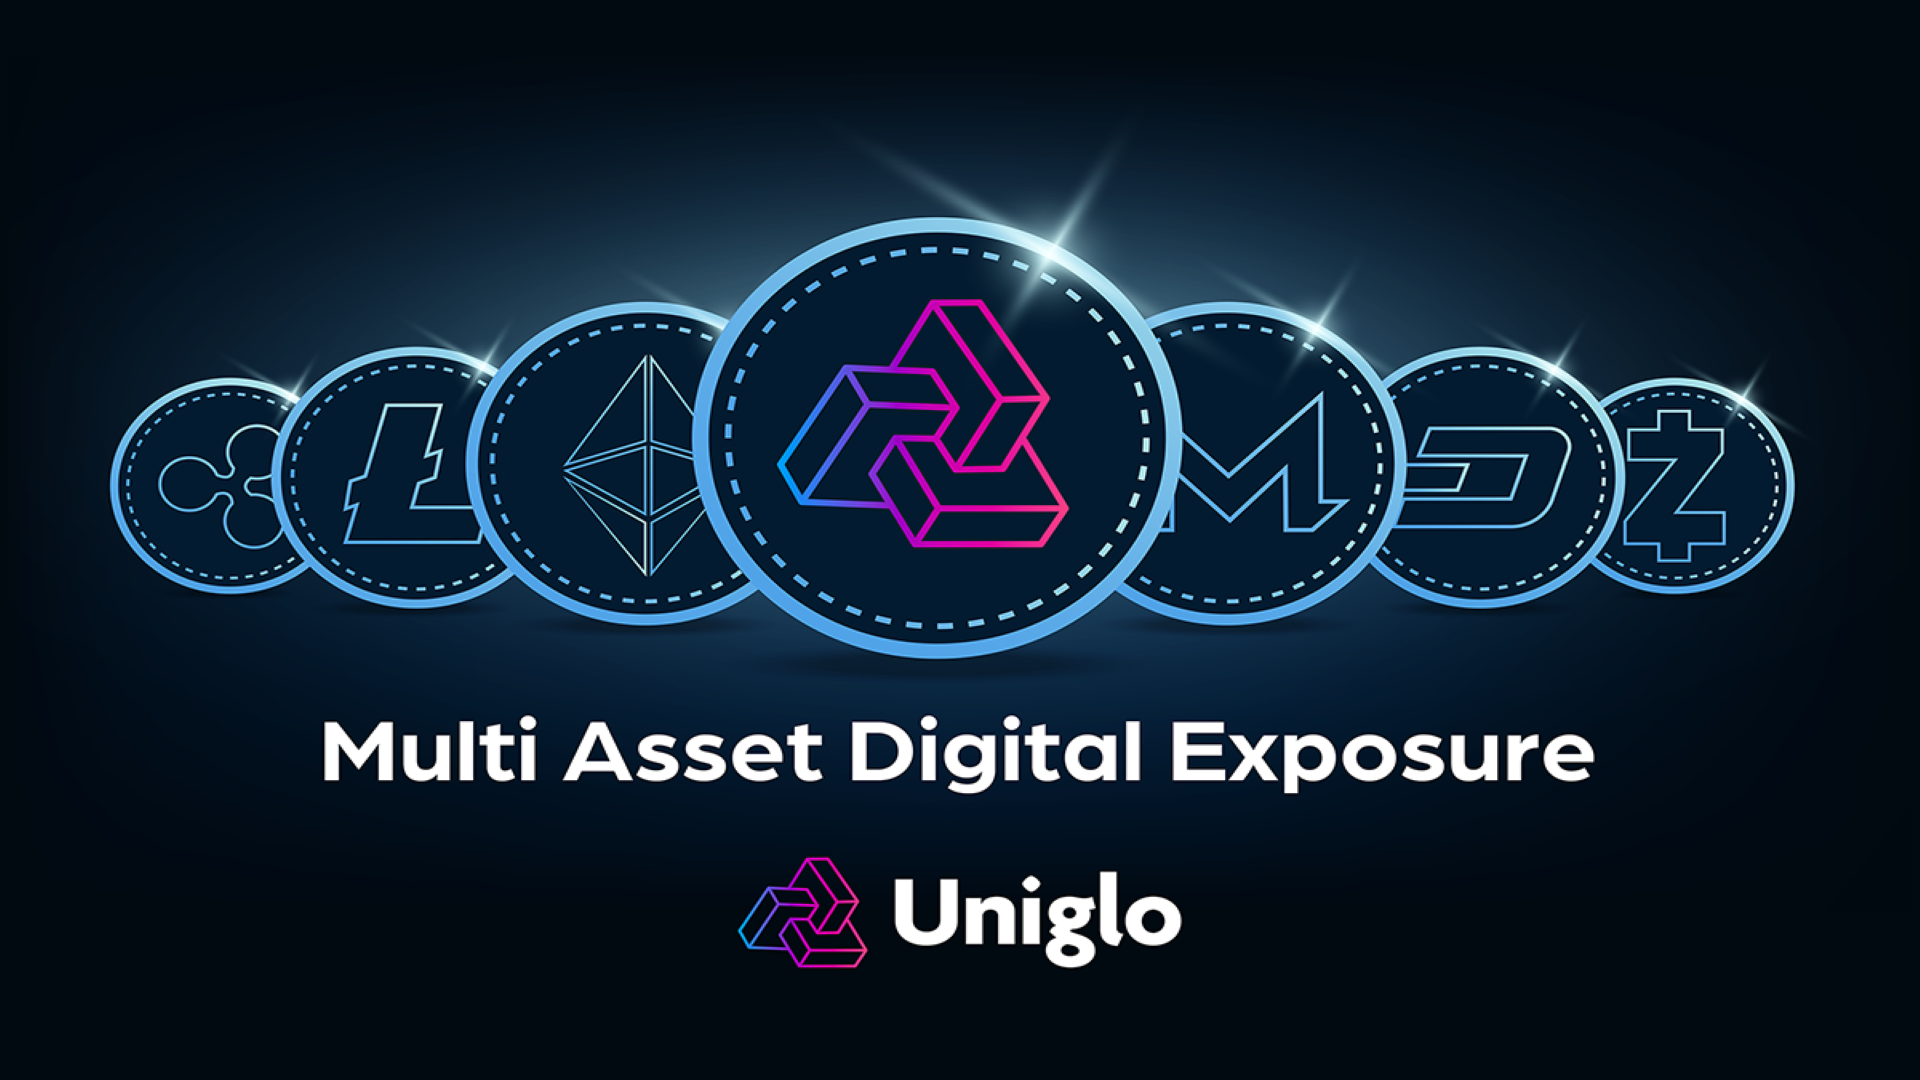 The astonishing supply burn Uniglo.io team is planning to do could rocket it into top Crypto lists alongside Dash2Trade and SHIB